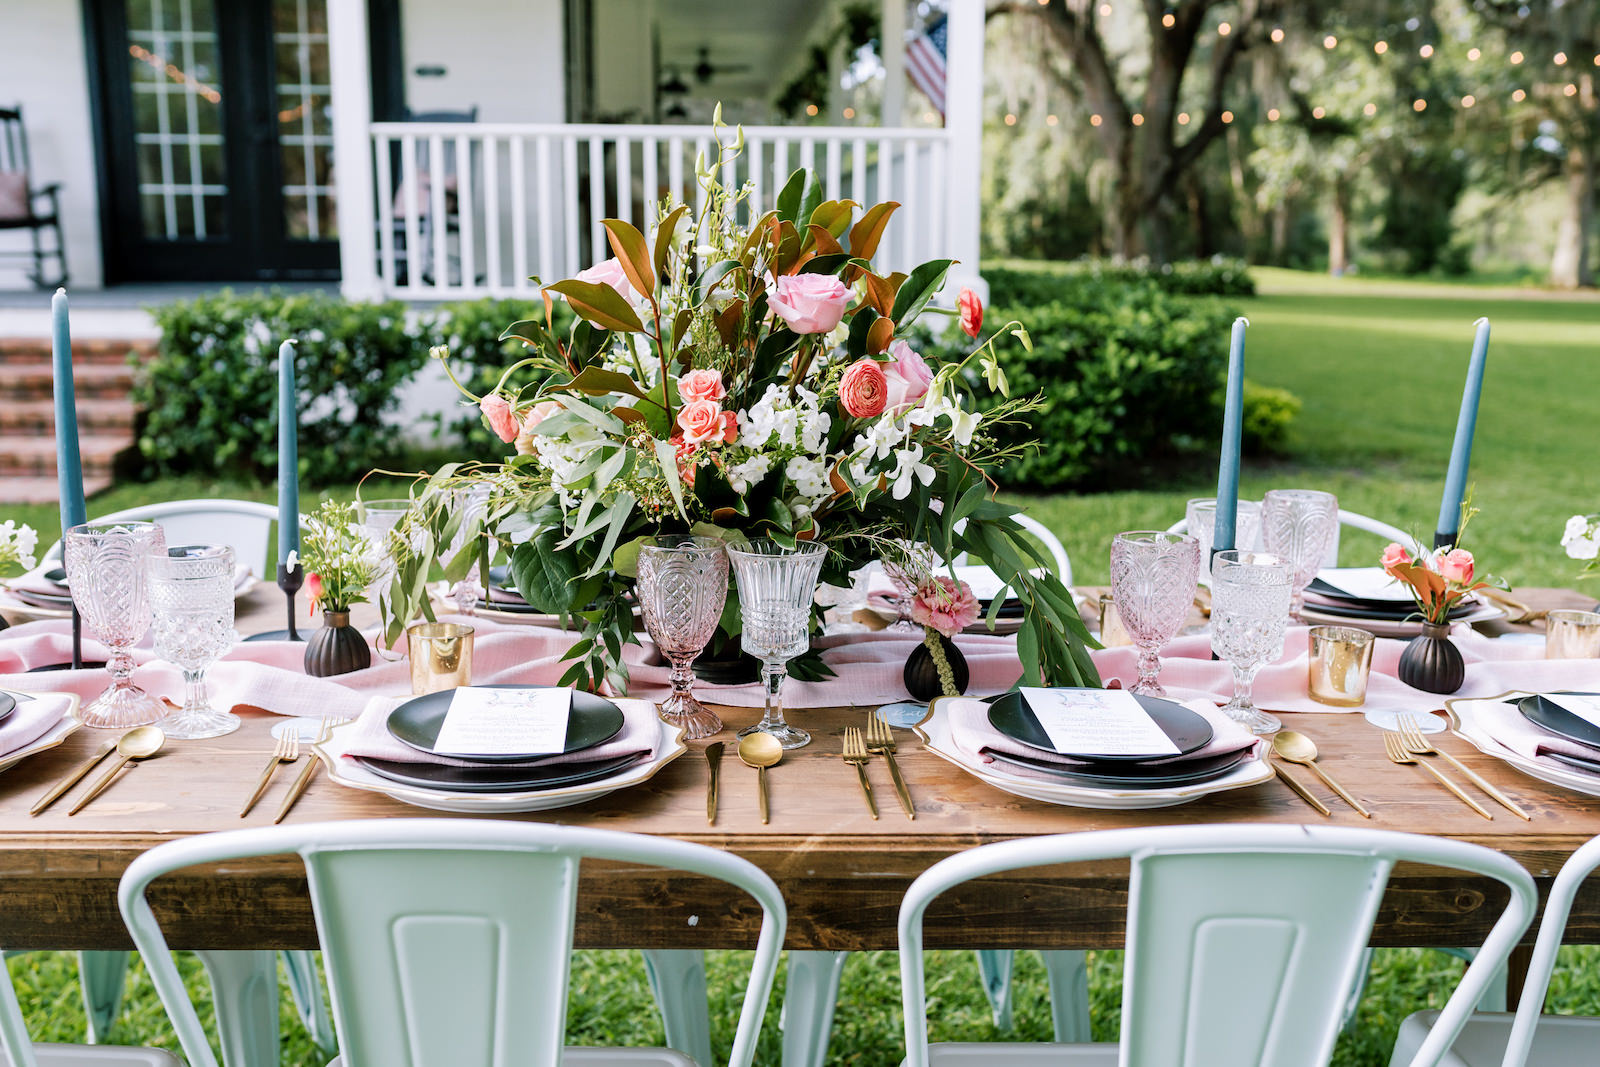 Southern Elegant Inspired Florida Outdoor Wedding Reception, Long Wooden Feasting Table with Dark Blue Place Setting, Gold Flatware, Pink Burlap Linens, Tall Blue Candelabras, Low Floral Centerpiece with Pink Roses, Orange Florals, and Magnolia Leaf Greenery | Tampa Bay Wedding Planner EventFull Weddings | Florida Wedding Linen Rentals Over The Top Linen Rentals